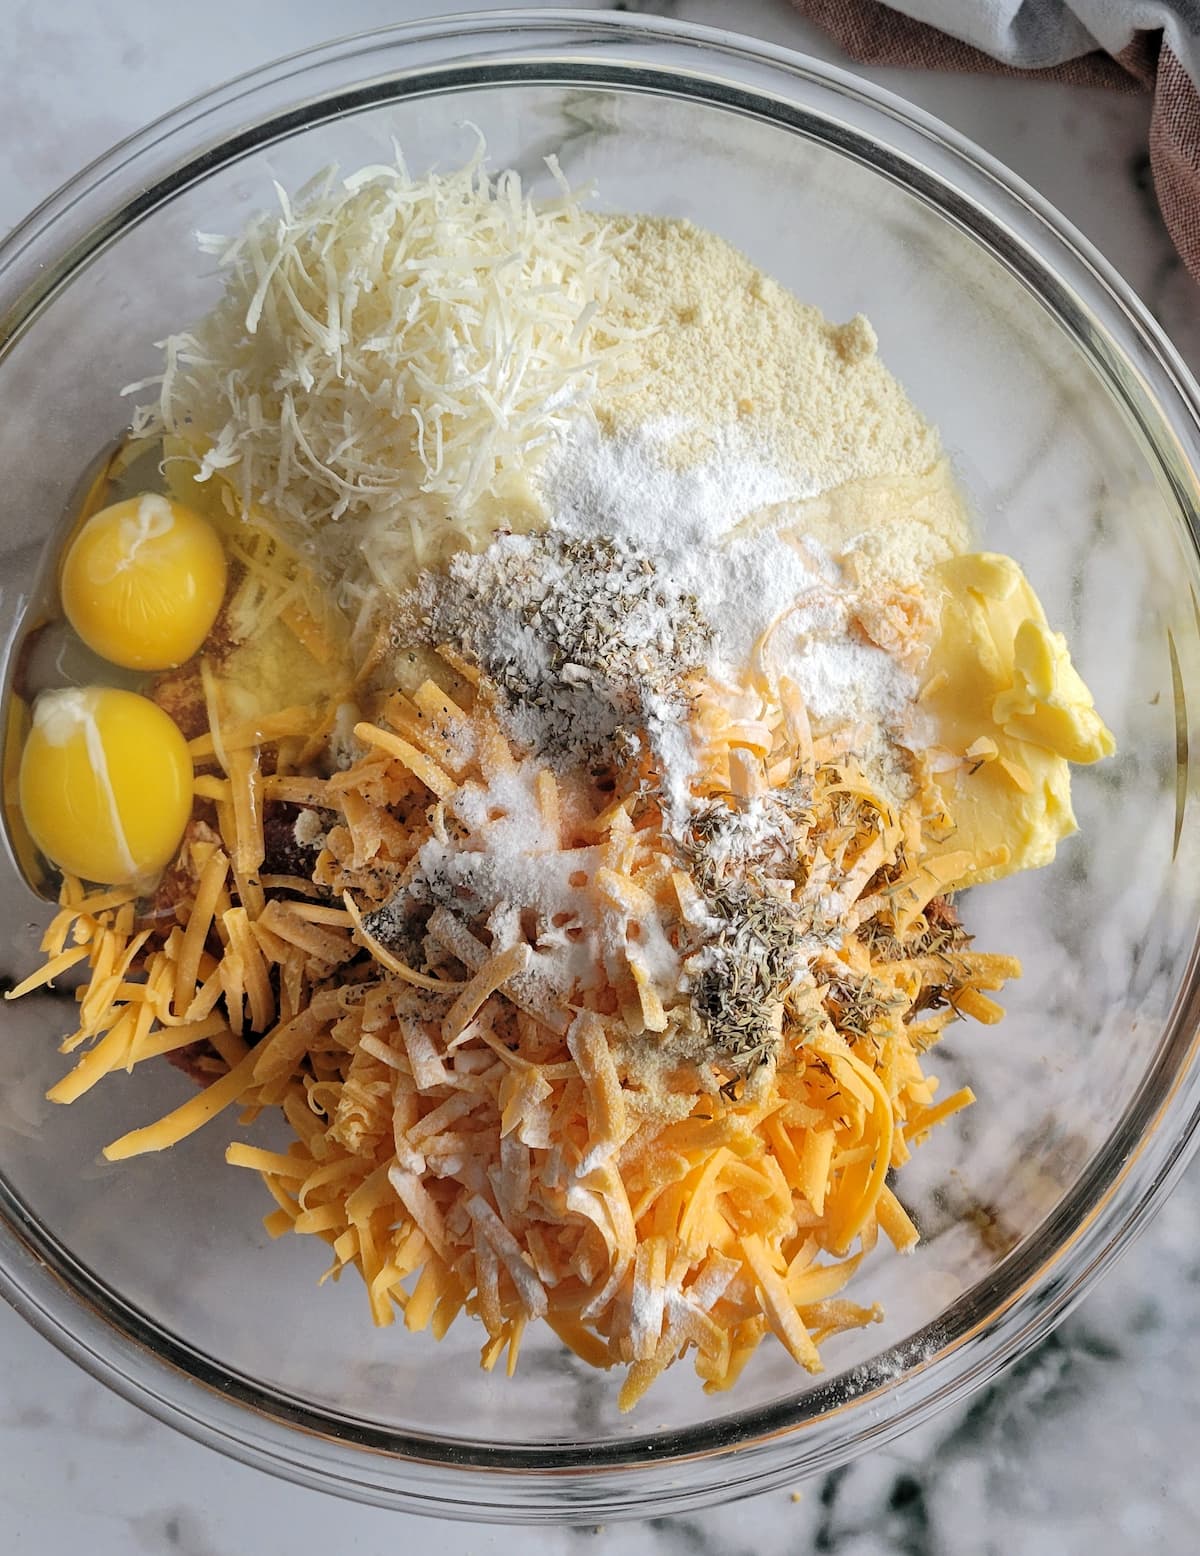 grated cheddar cheese, parmesan cheese, butter, eggs and spices unmixed in a bowl